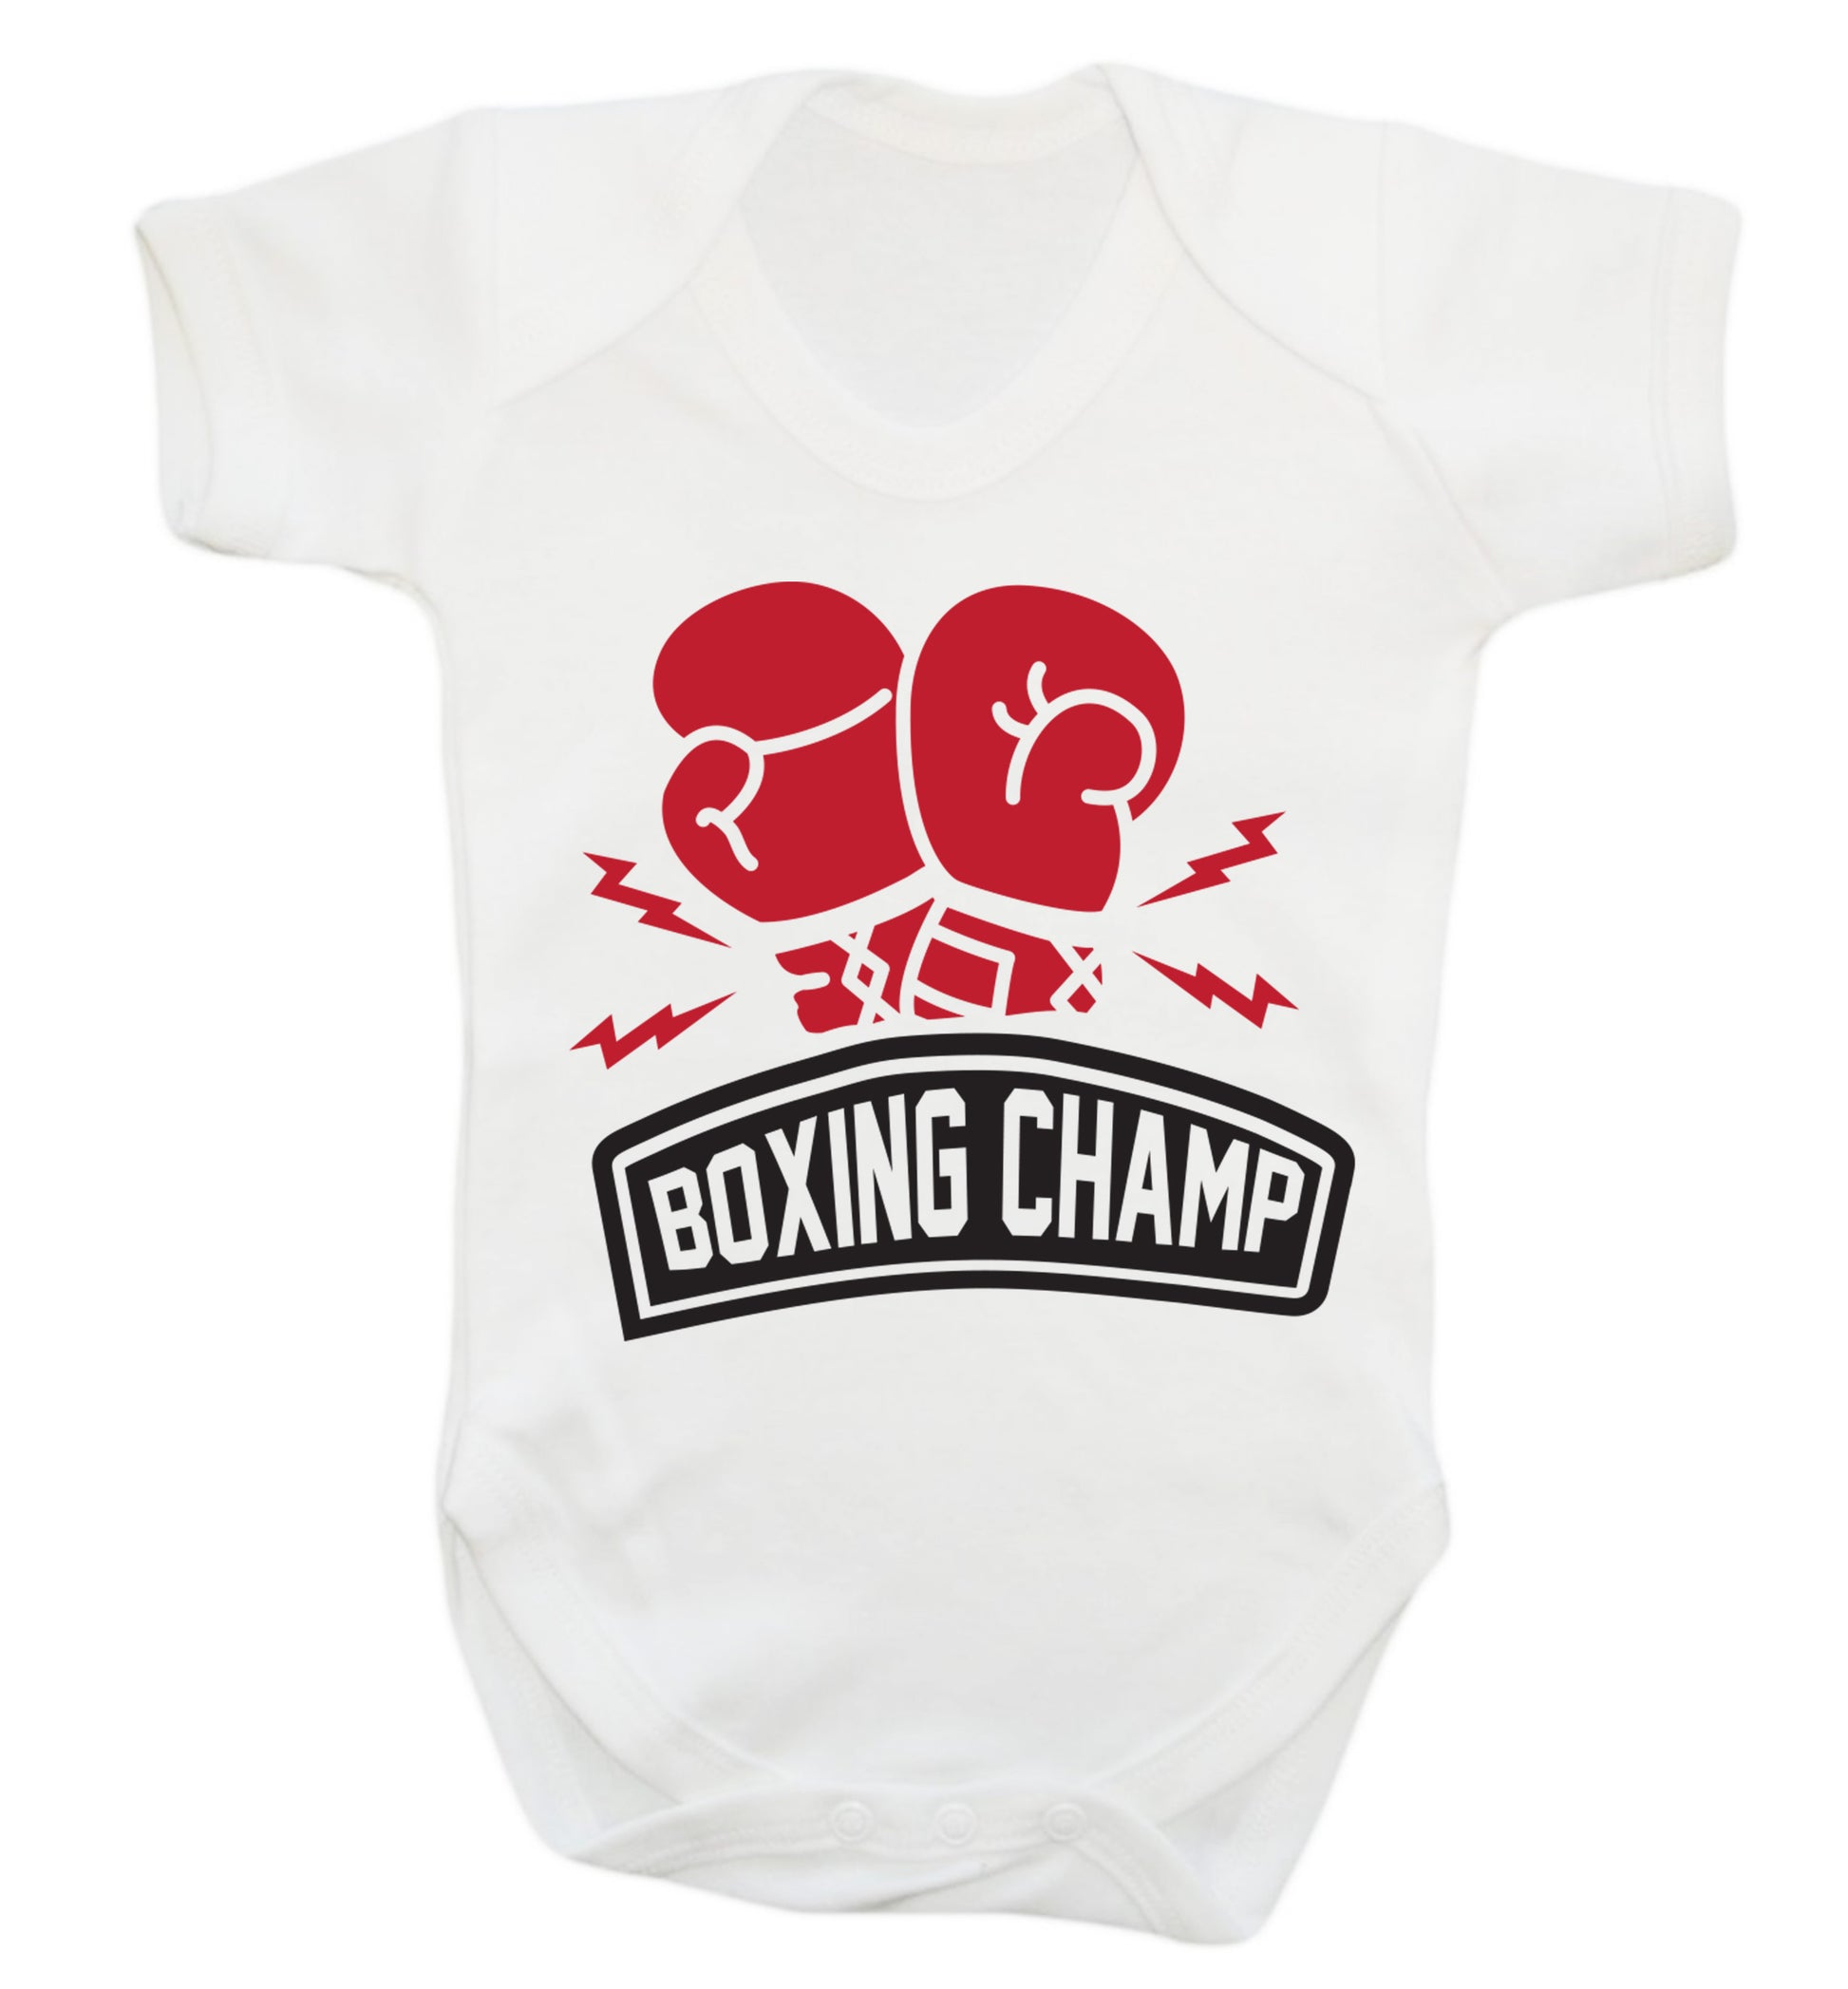 Boxing Champ Baby Vest white 18-24 months